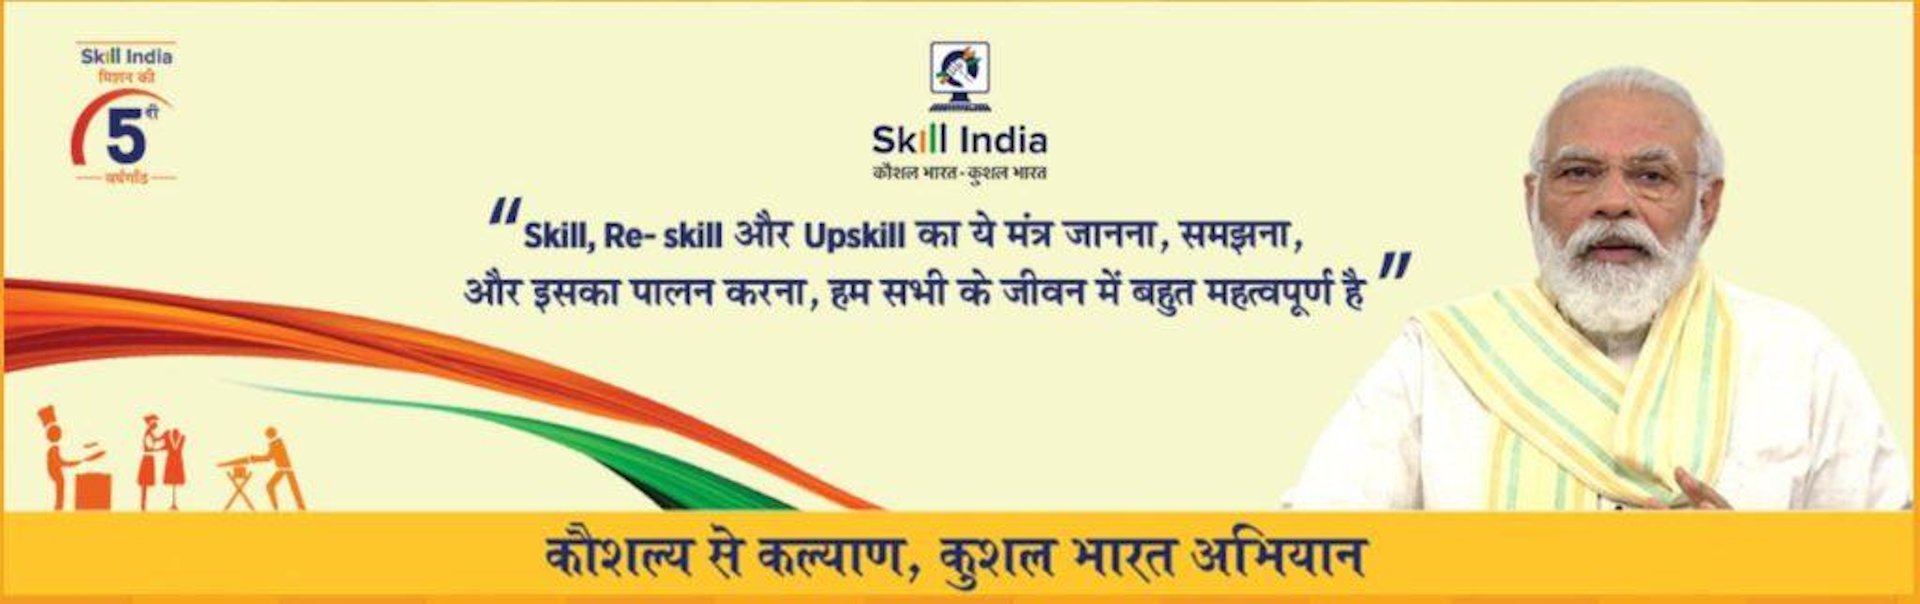 Make Skill, Re-skill and Upskill important Mantra of your life.